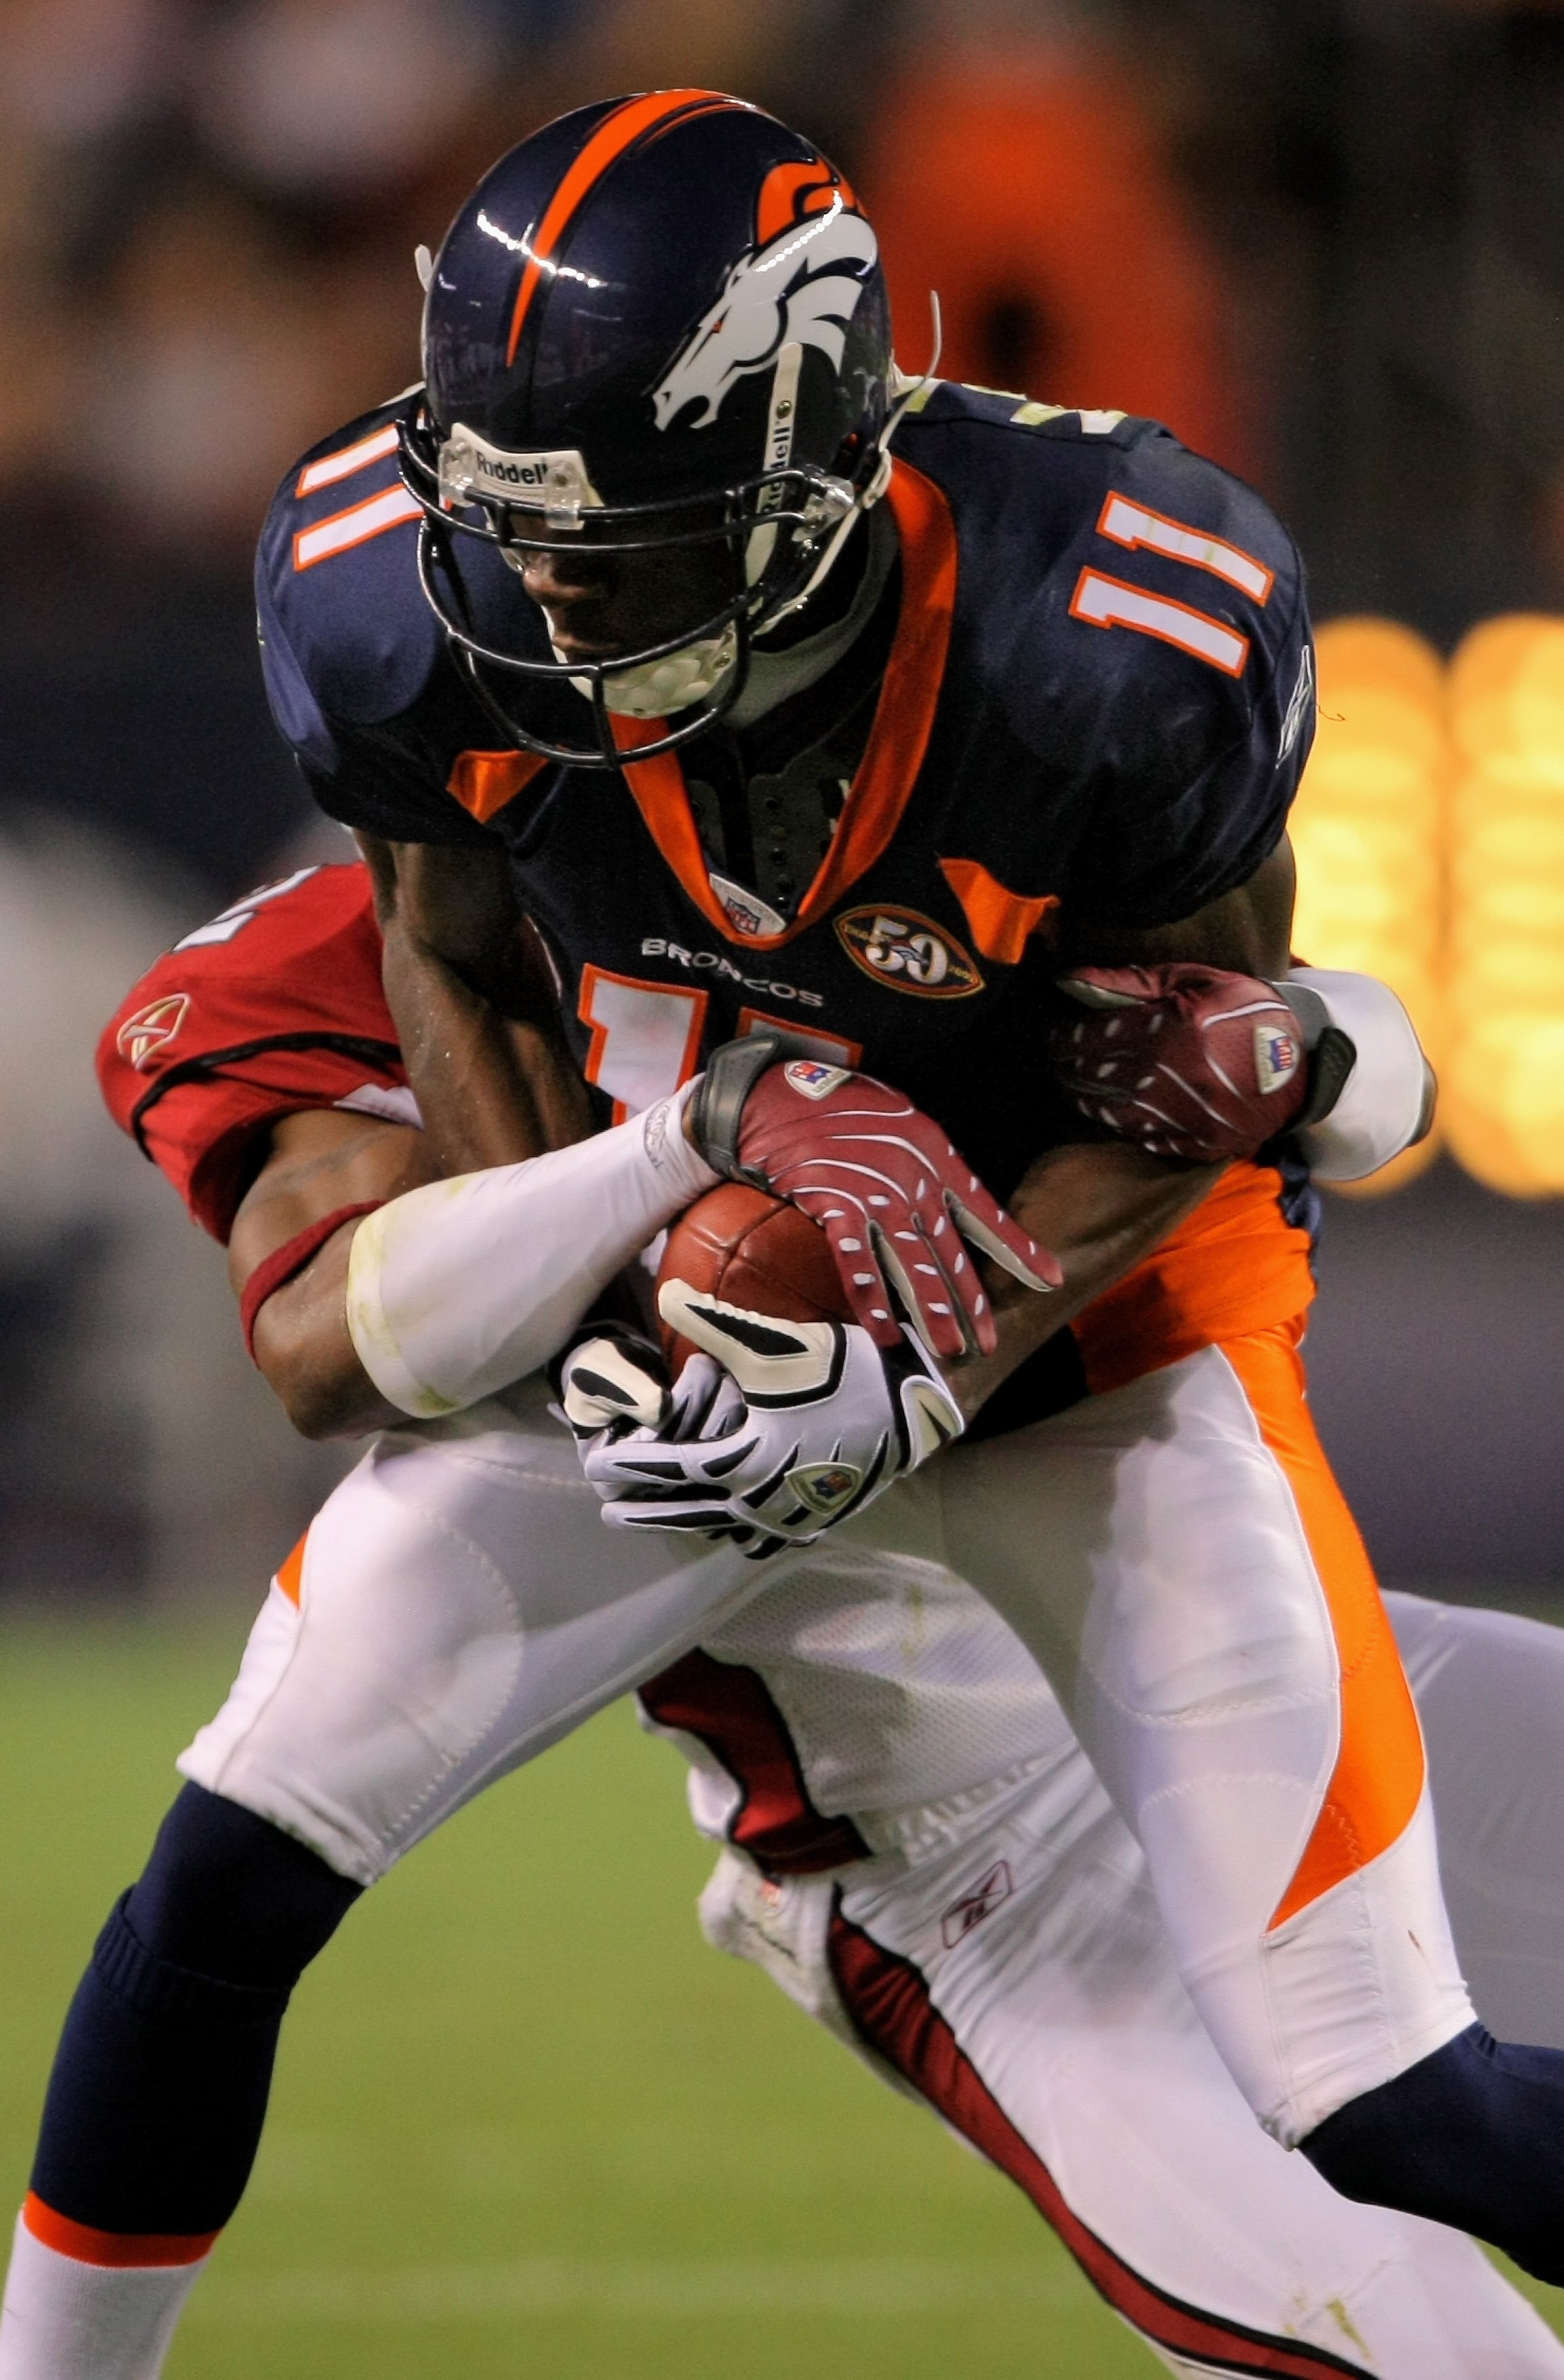 Broncos WR Kenny McKinley found dead in apparent suicide – The